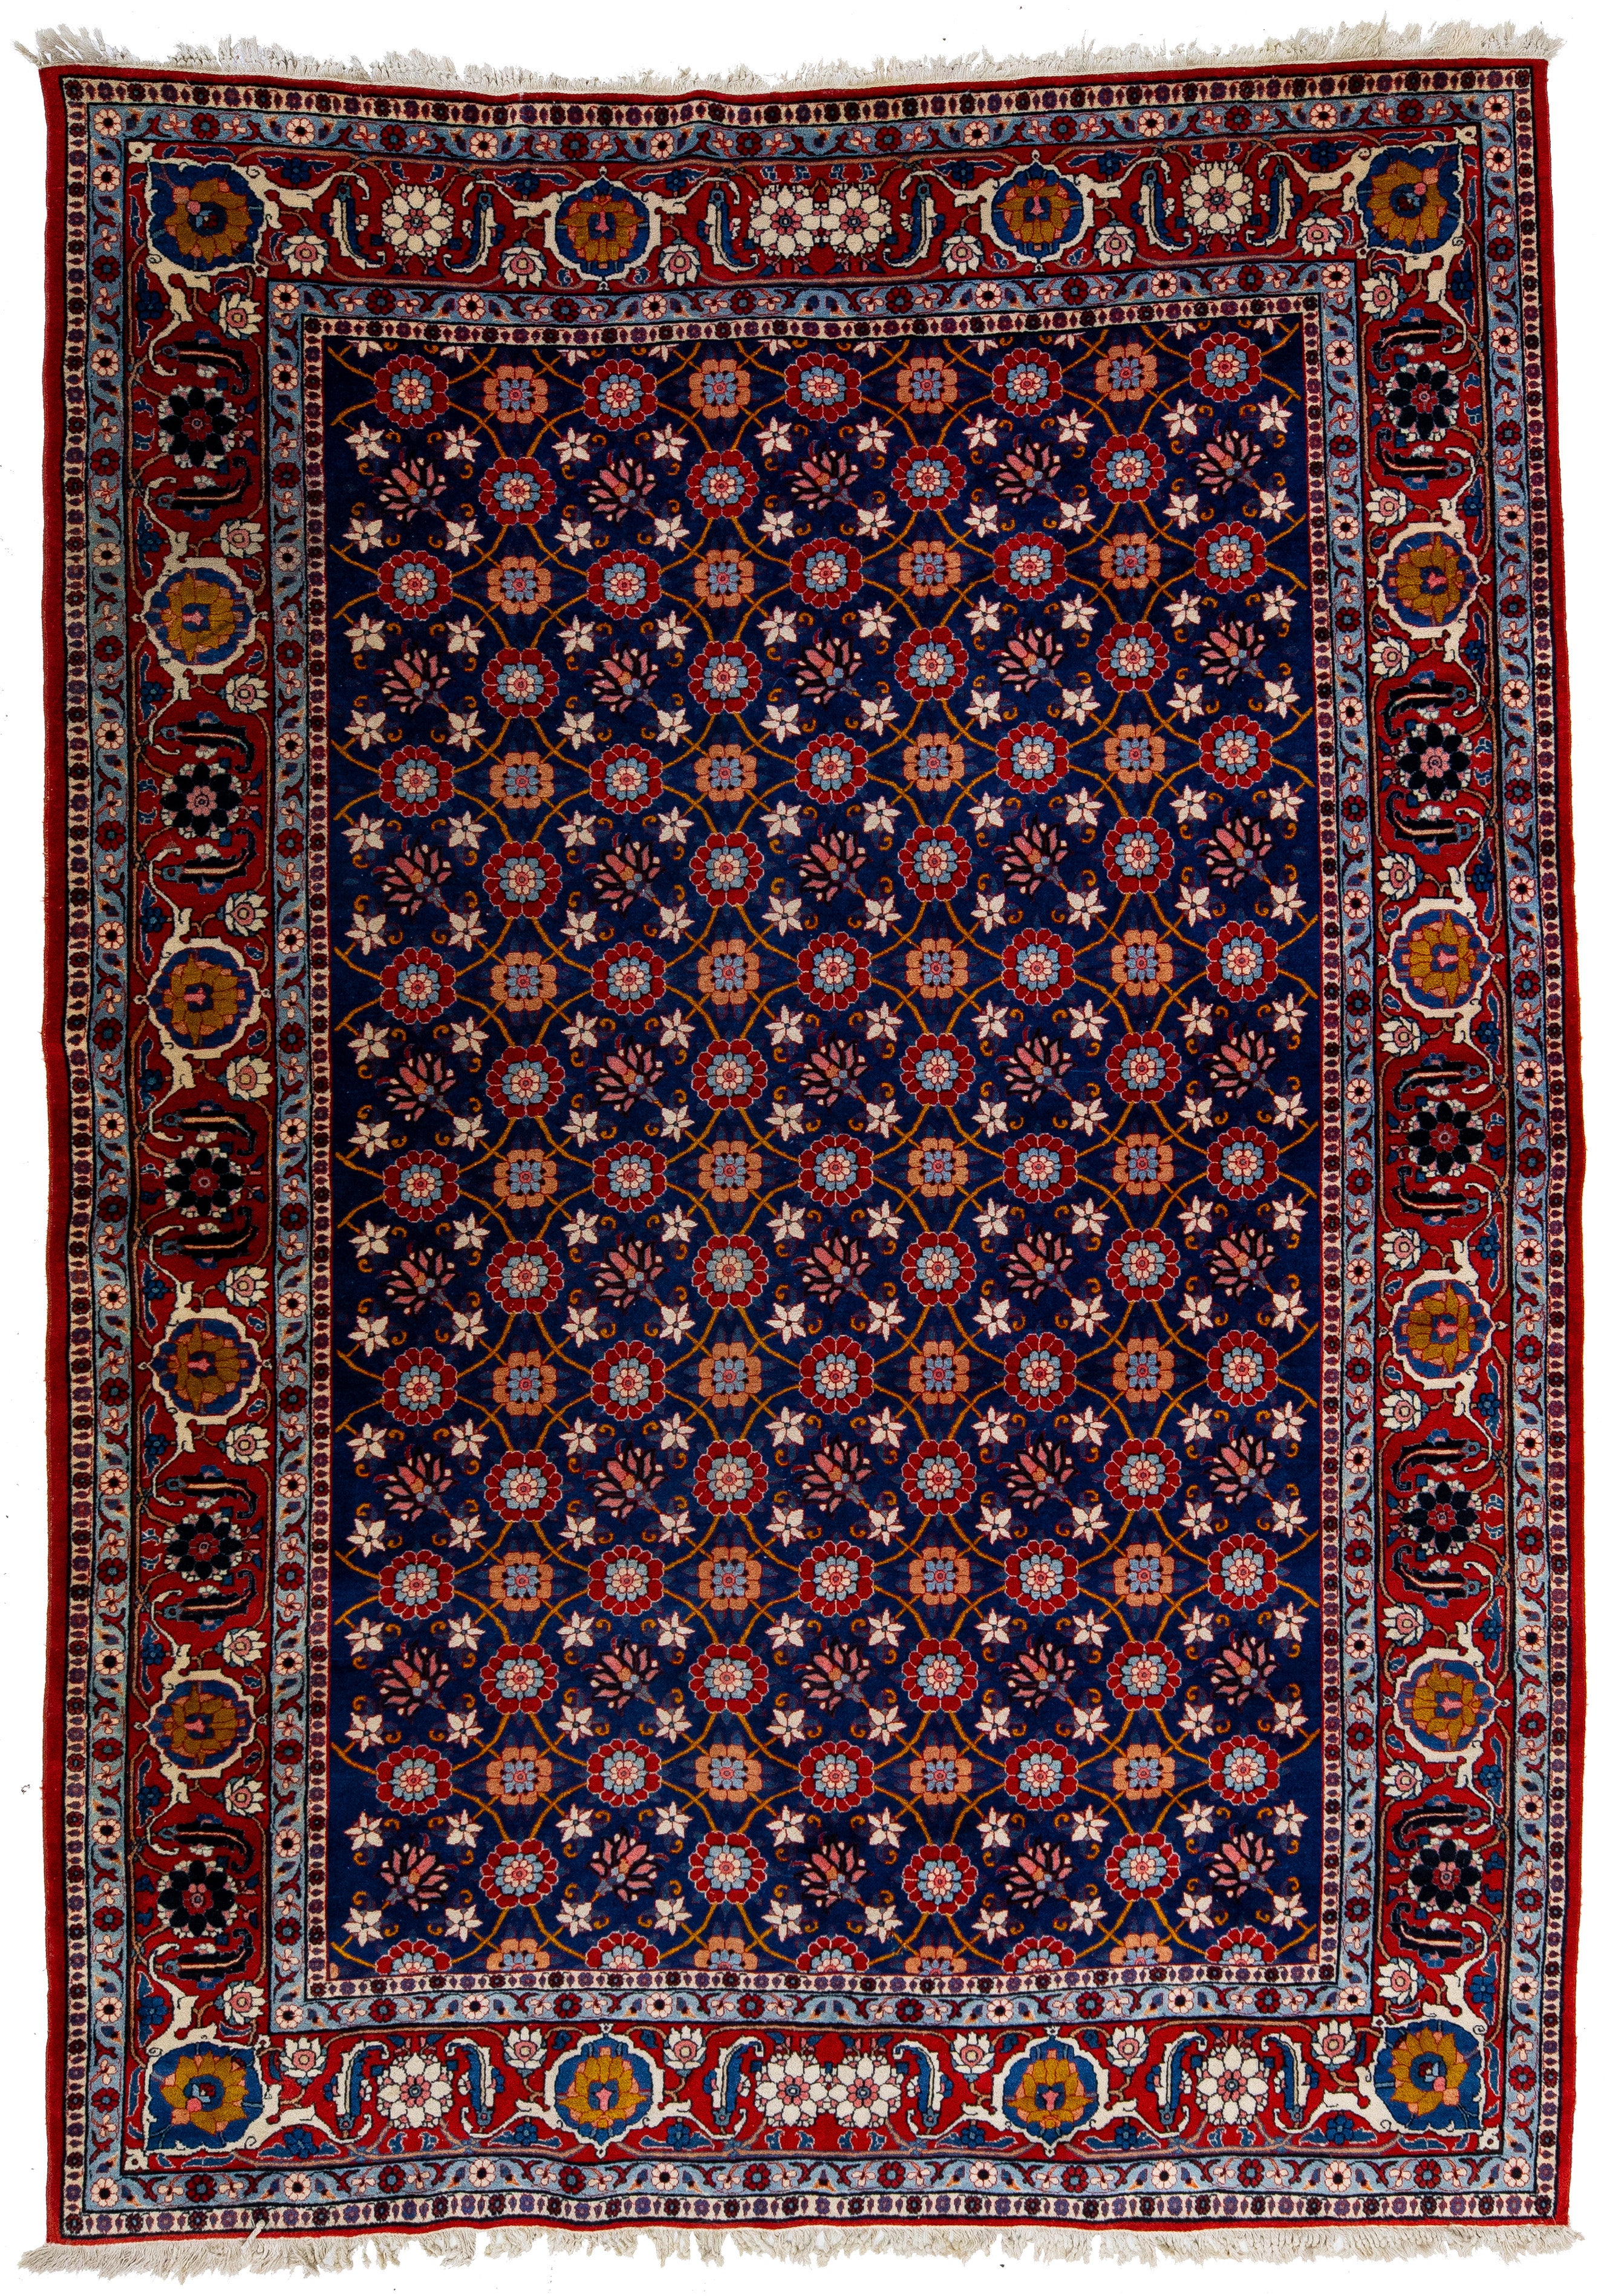 1920s Persian Tabriz Wool Rug Adorned with Lavish Floral Pattern